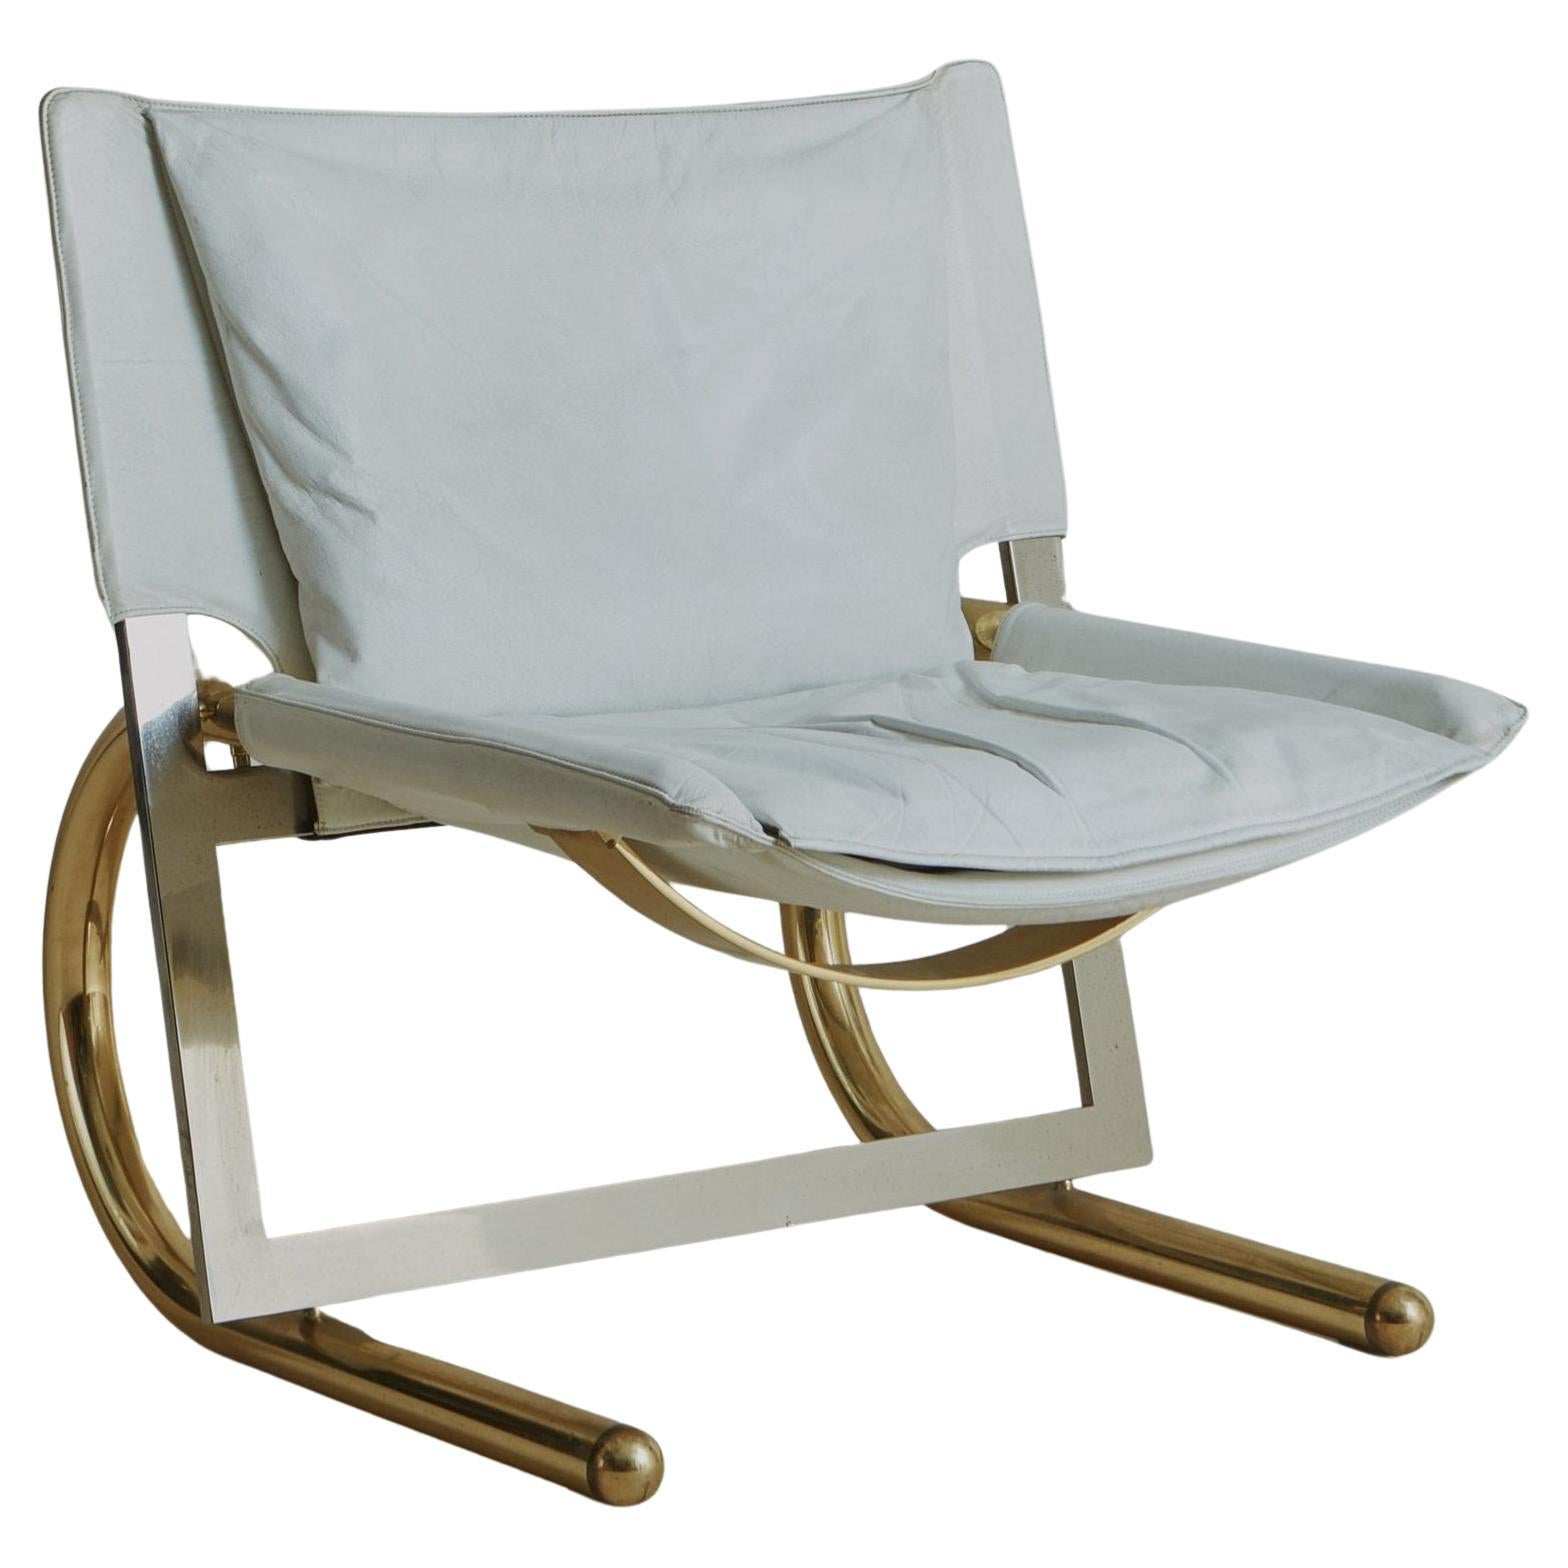 Curved Brass Frame Sling Chair in Original White Leather, Italy 1970s